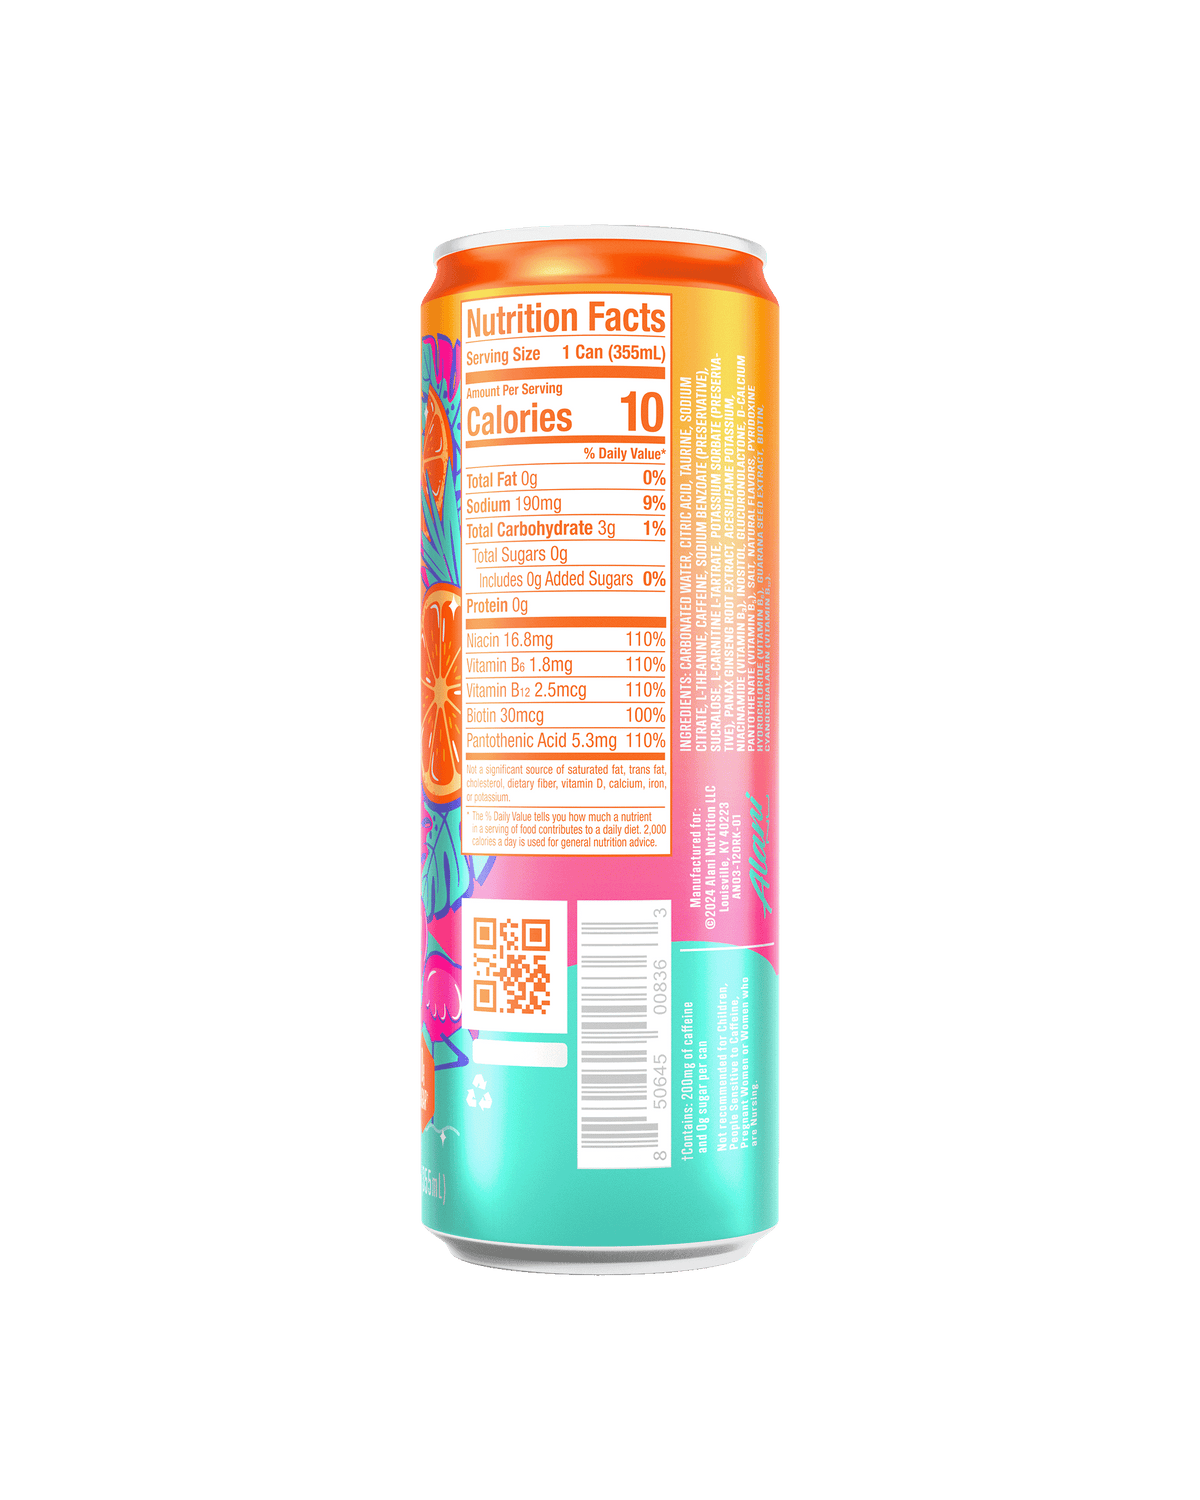 The back view of an Alani Nu Orange Kiss Energy Drink can, highlighting nutrition facts. 